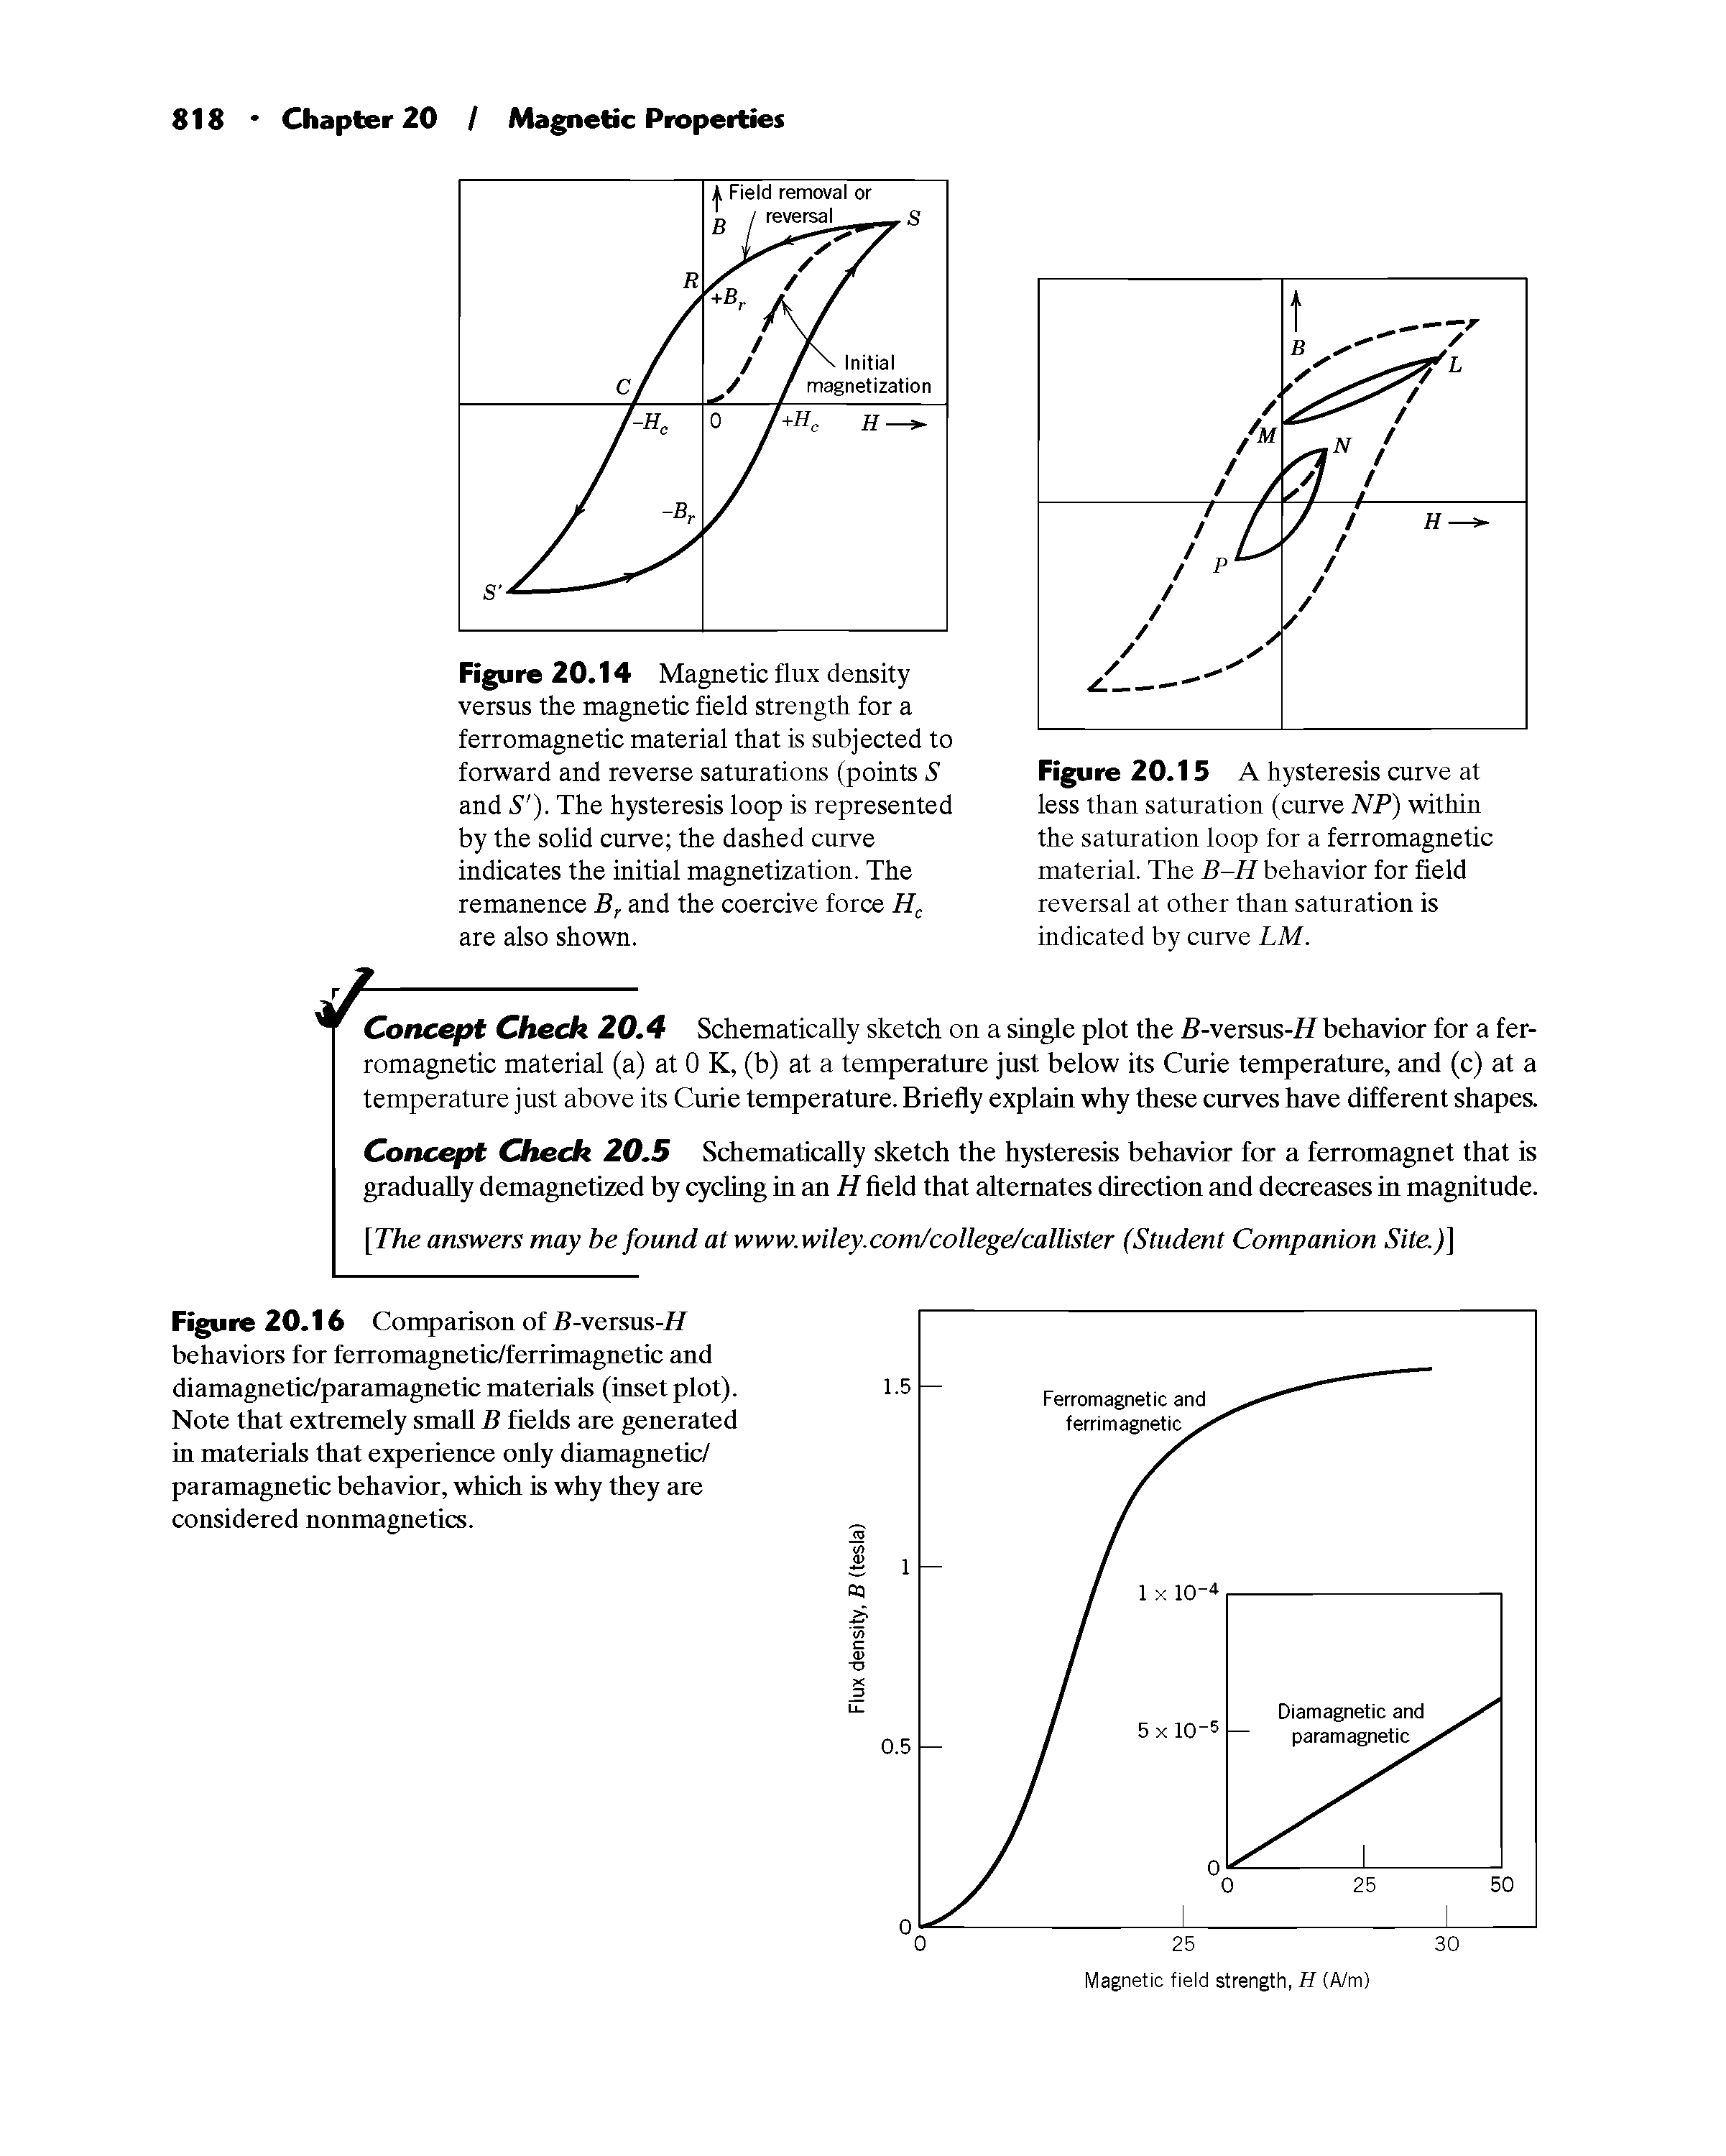 Figure 20.16 Comparison of 5-versus-ff behaviors for ferromagnetic/ferrimagnetic and diamagnetic/paramagnetic materials (inset plot). Note that extremely small B fields are generated in materials that experience only diamagnetic/ paramagnetic behavior, which is why they are considered nonmagnetics.